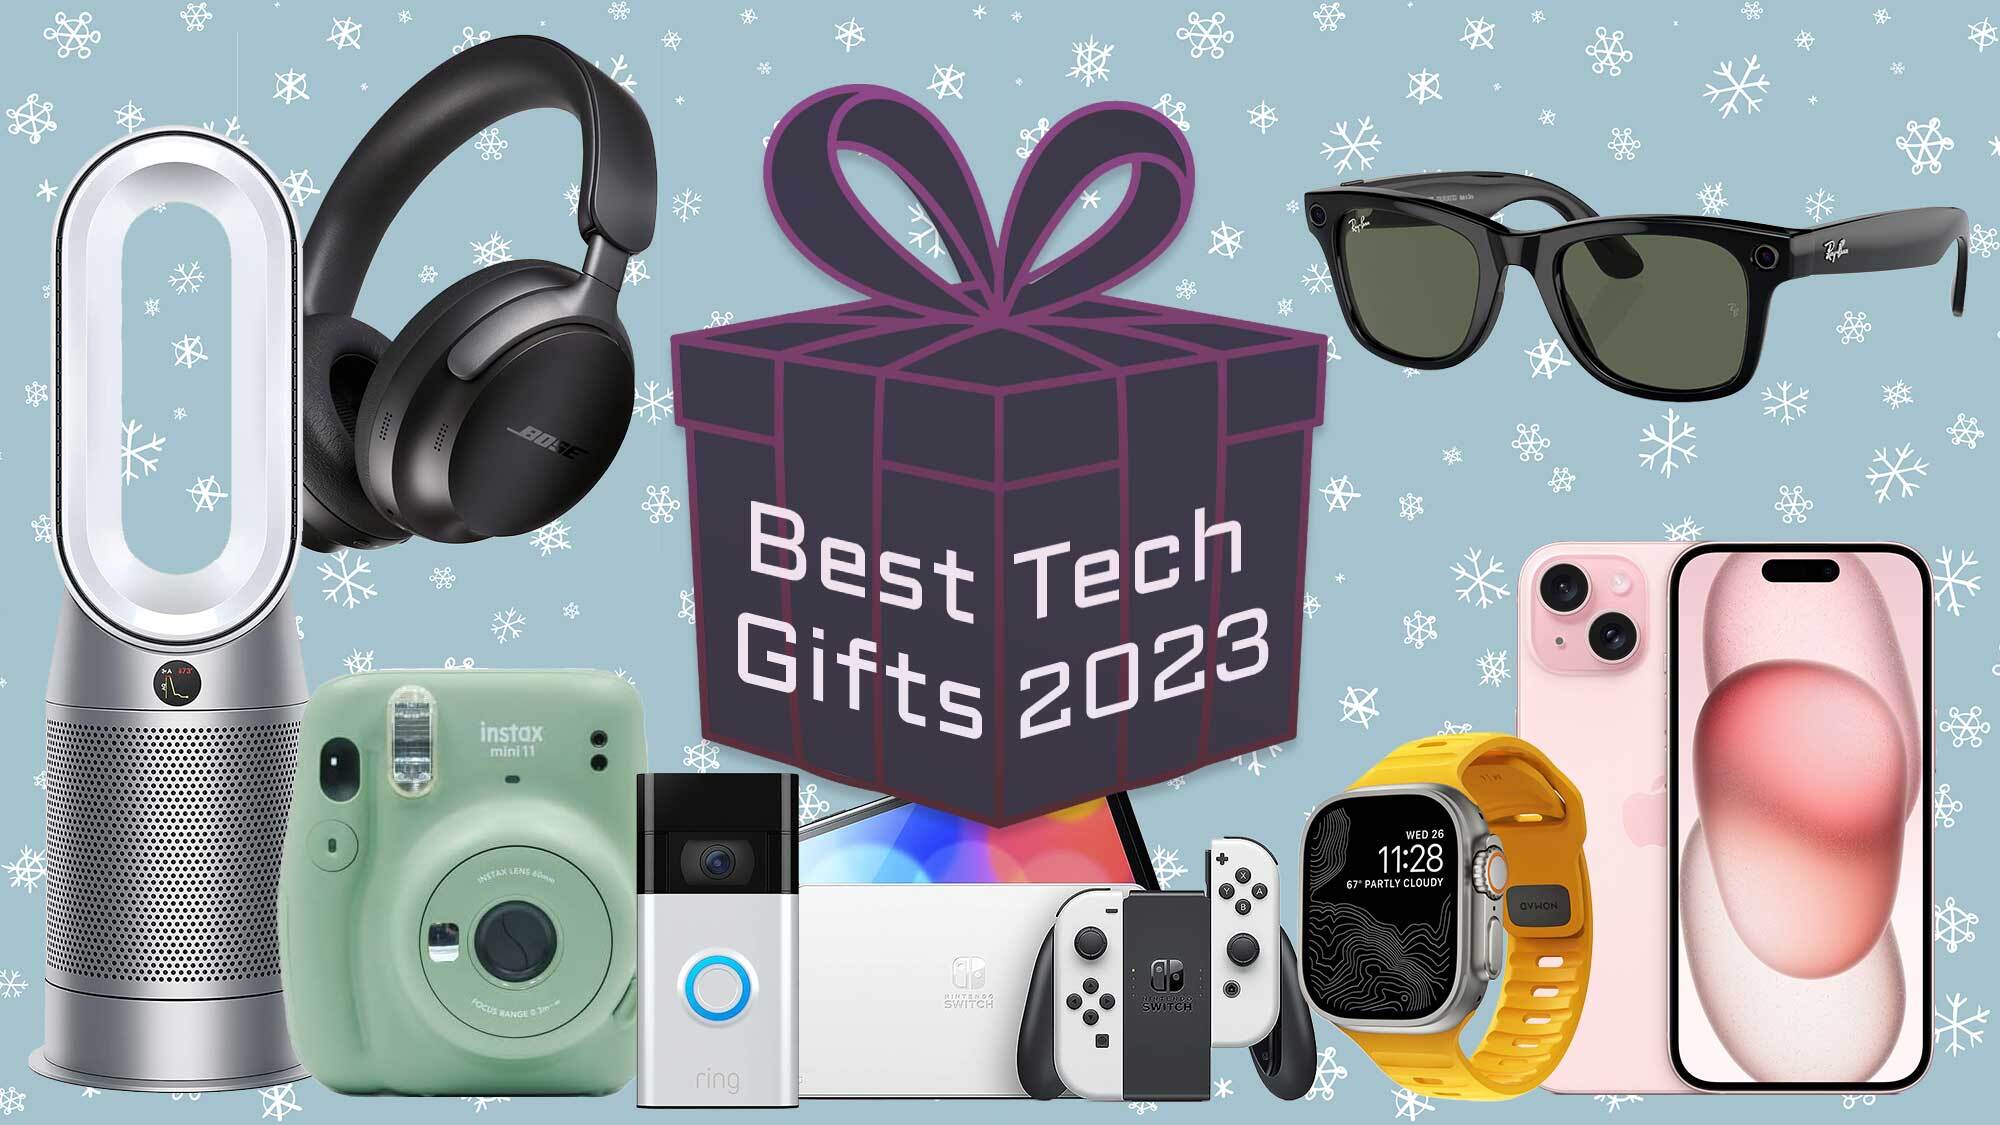 32 Cheap Tech Gifts Under $25: Speakers, Accessories, and More